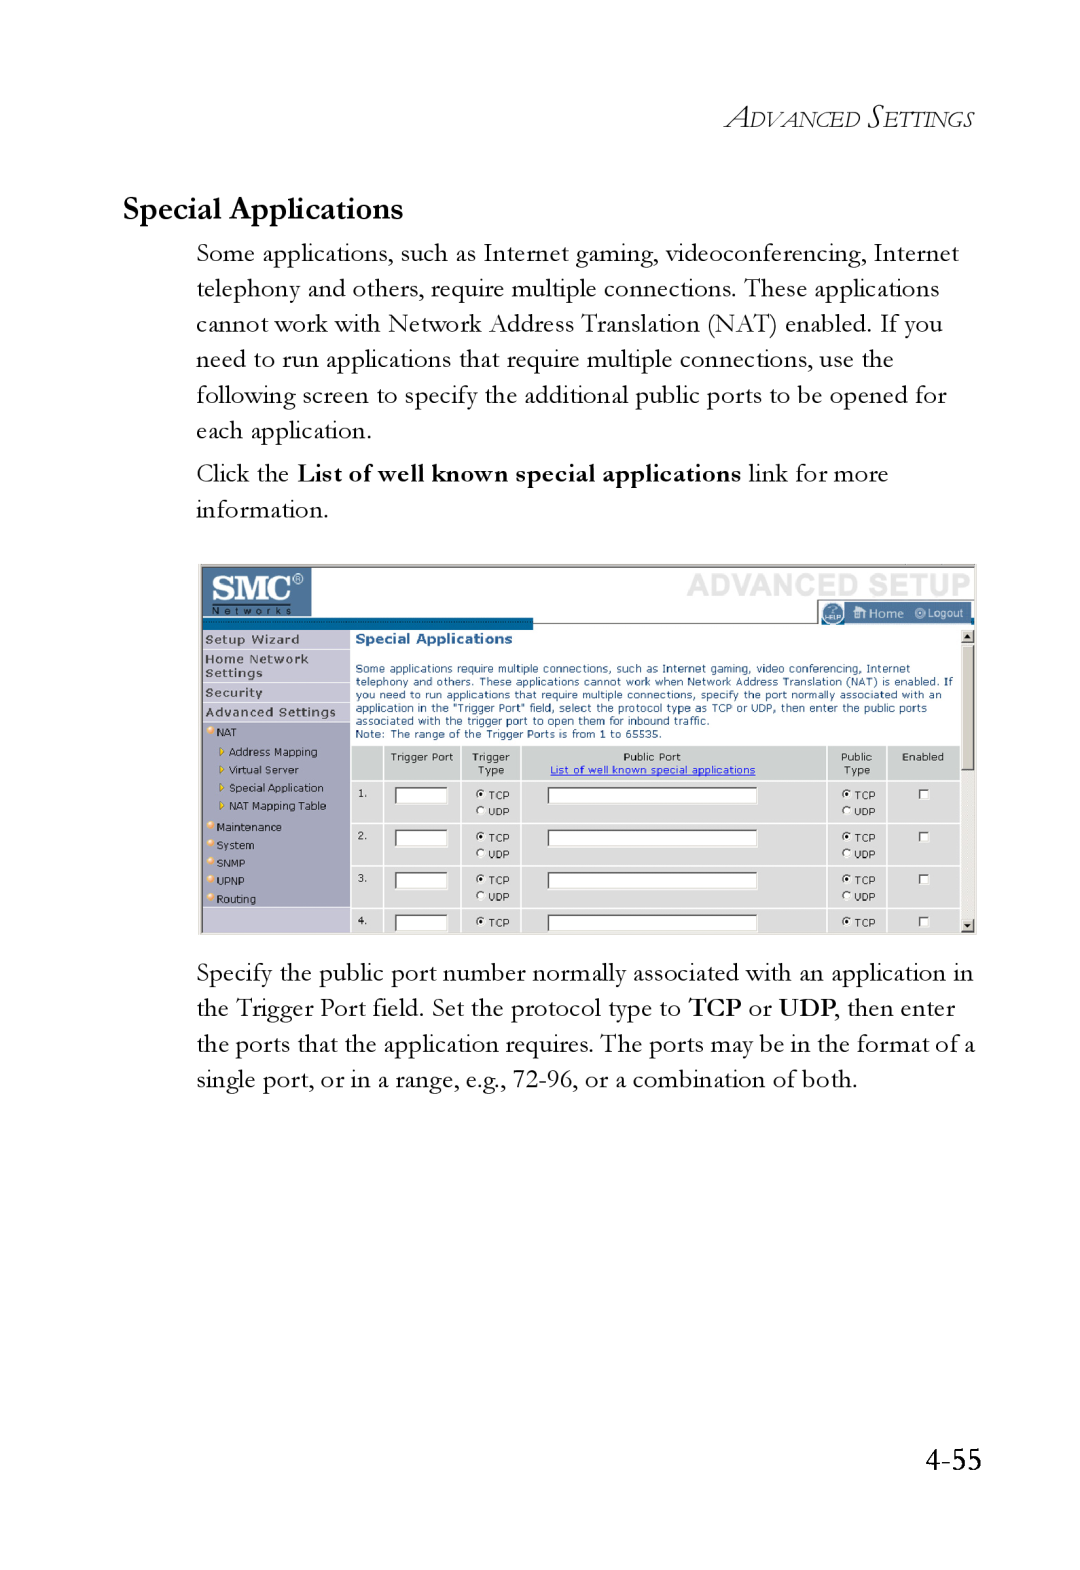 SMC Networks SMCWBR14T-G manual 4-55, Special Applications 